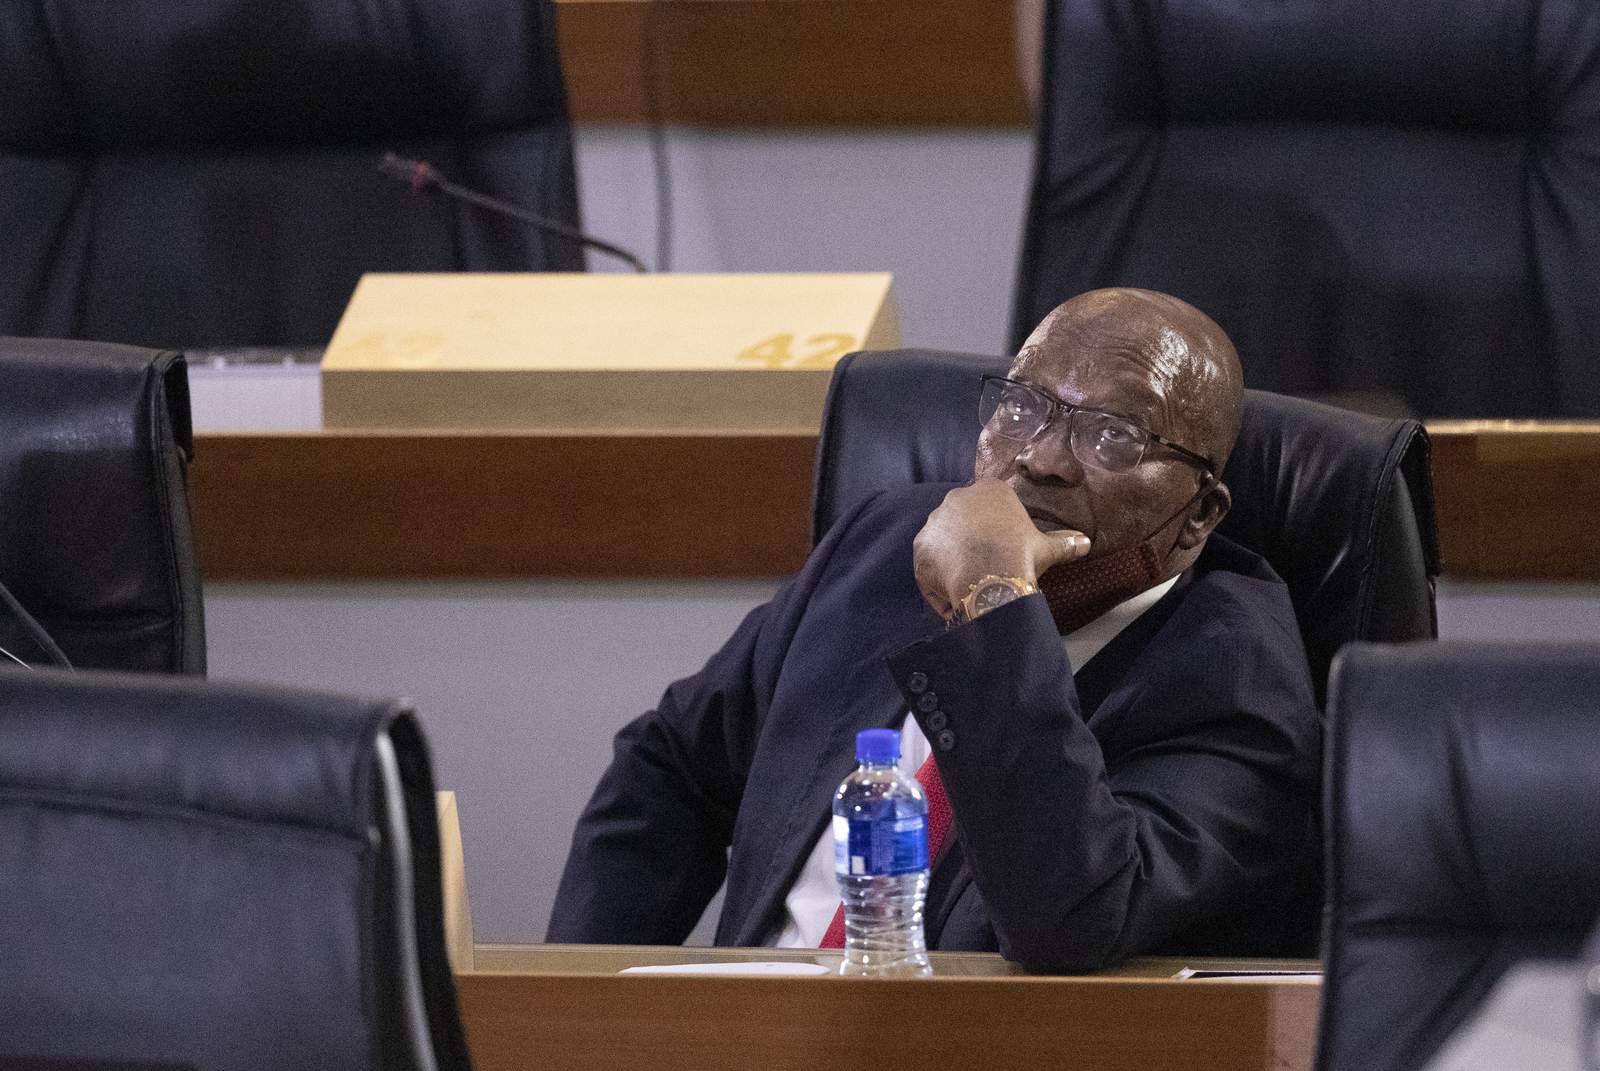 South Africa's former president is warned to appear in court